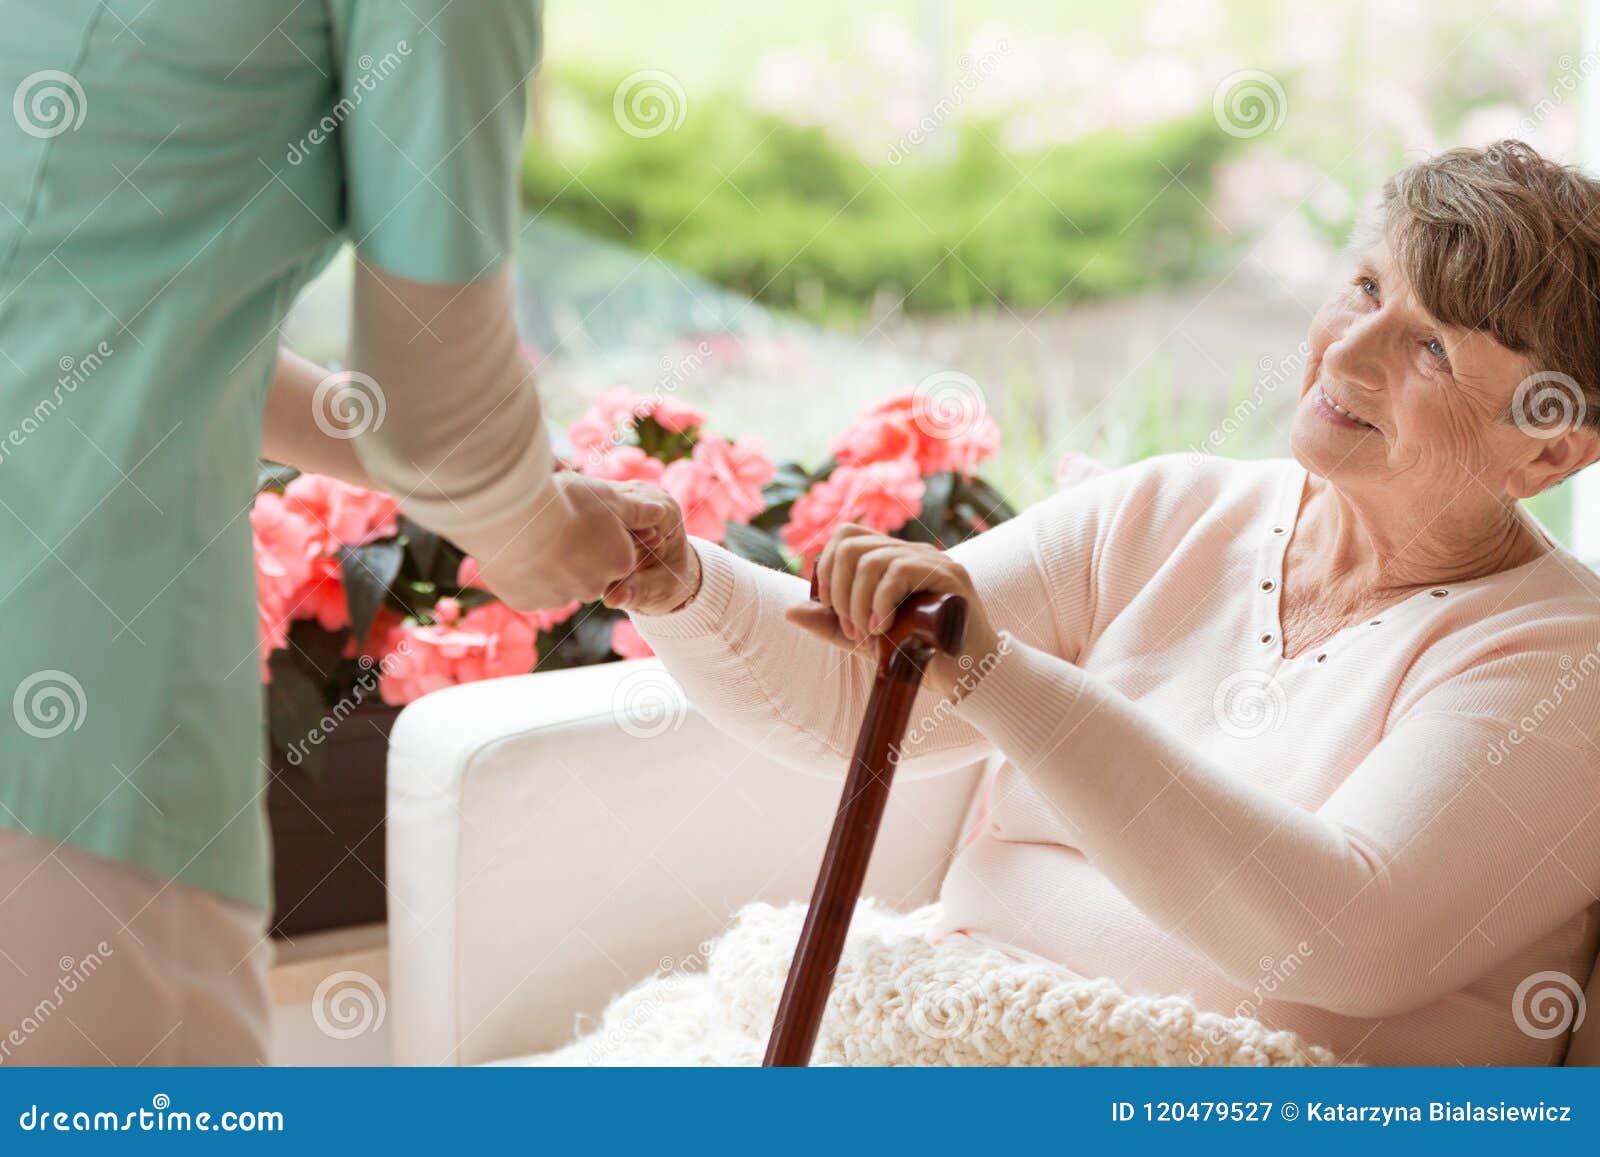 doctor helping an elderly woman with parkinson`s disease get up